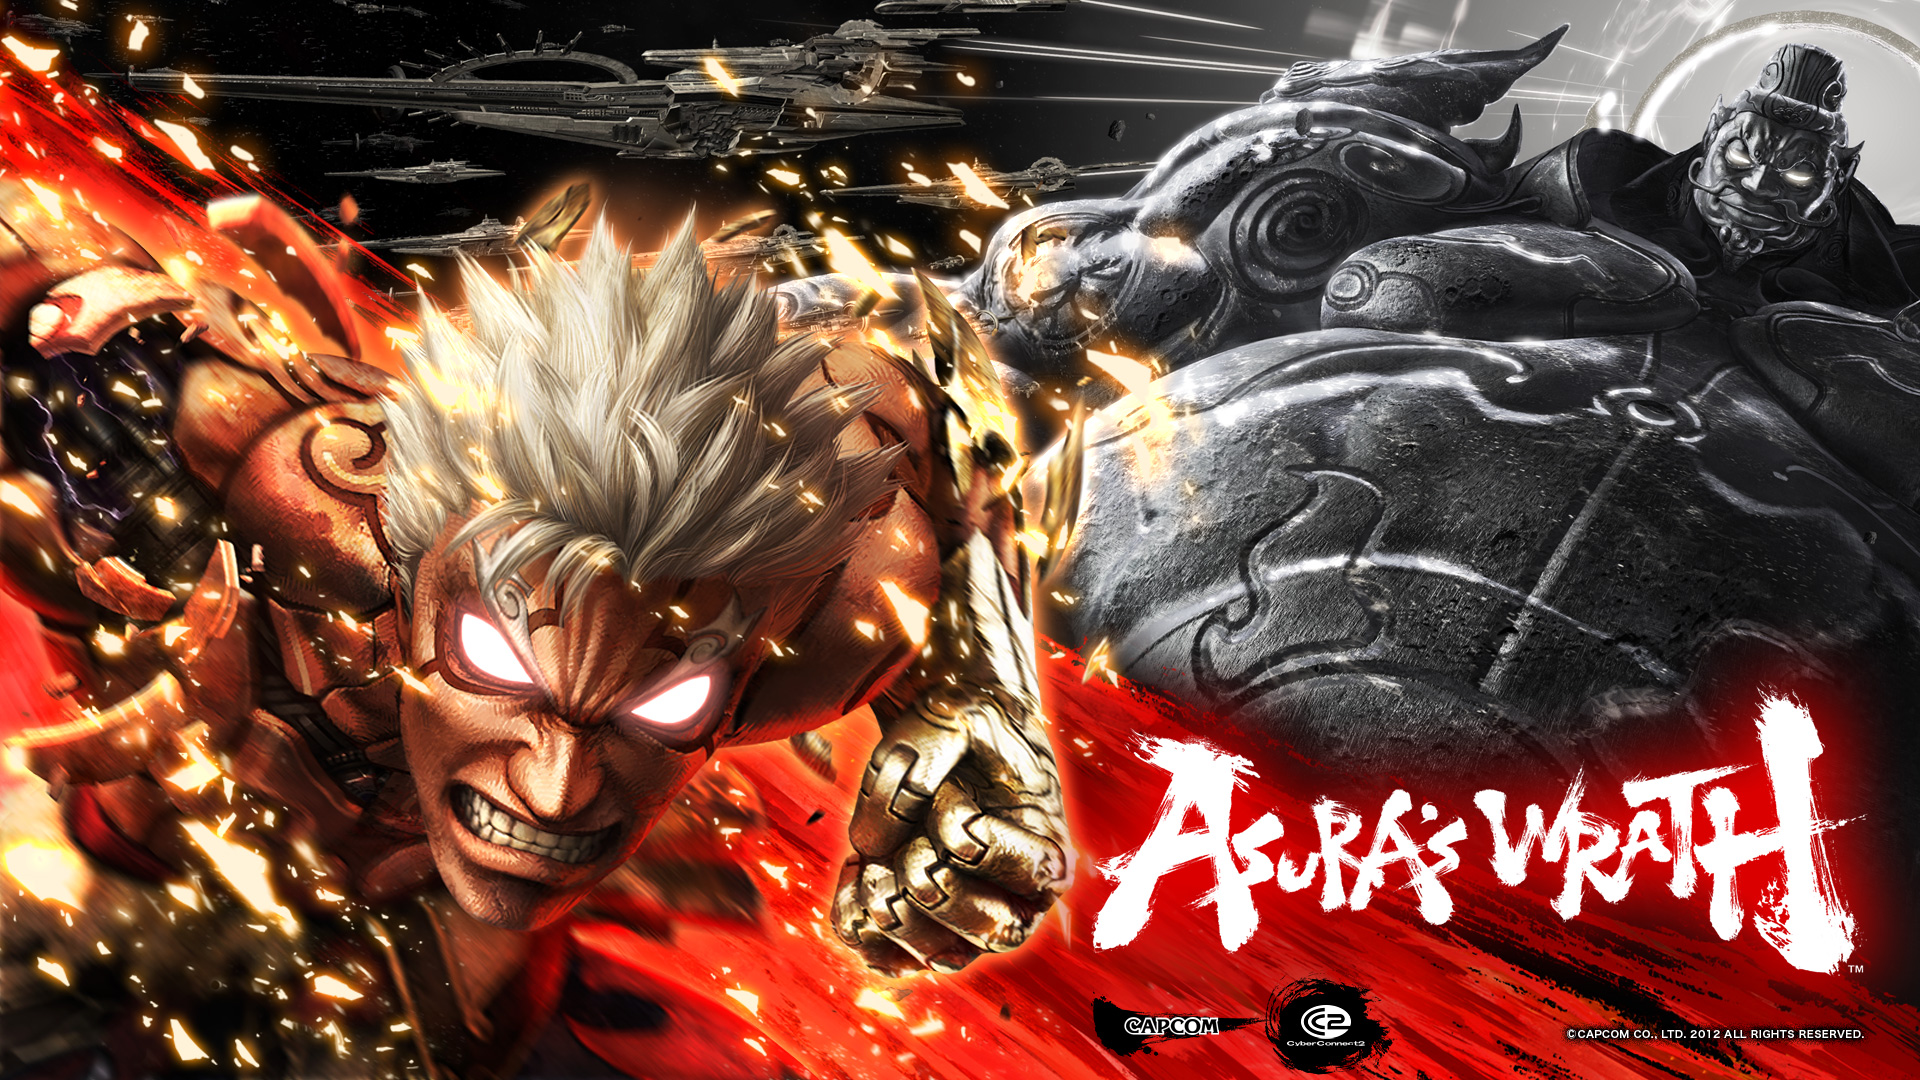 Amazing Asura's Wrath Pictures & Backgrounds